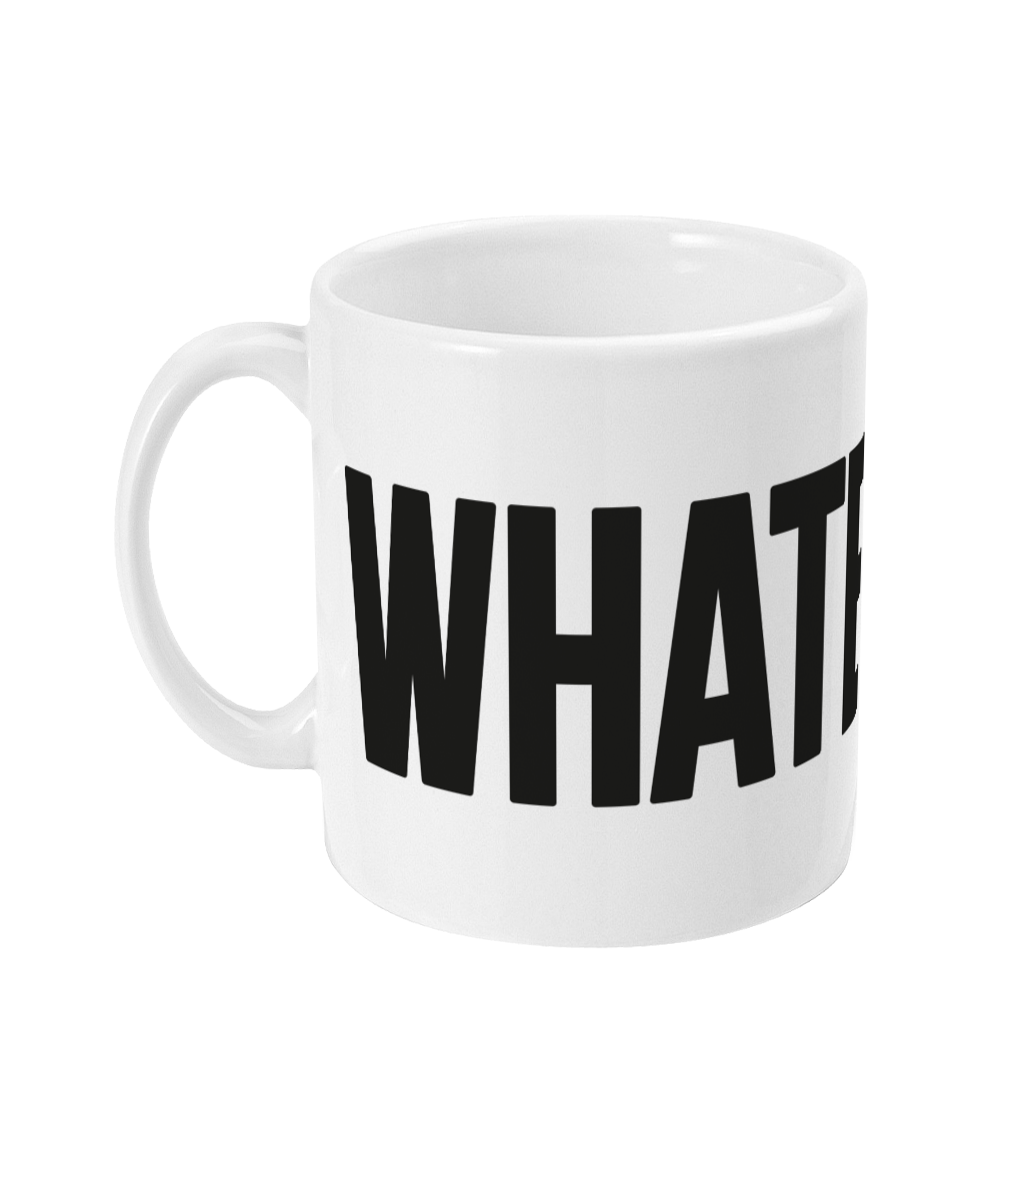 A unique mug featuring bold  statement. It will make the perfect gift for someone whether it's for a birthday, Christmas or any other special occasion. 